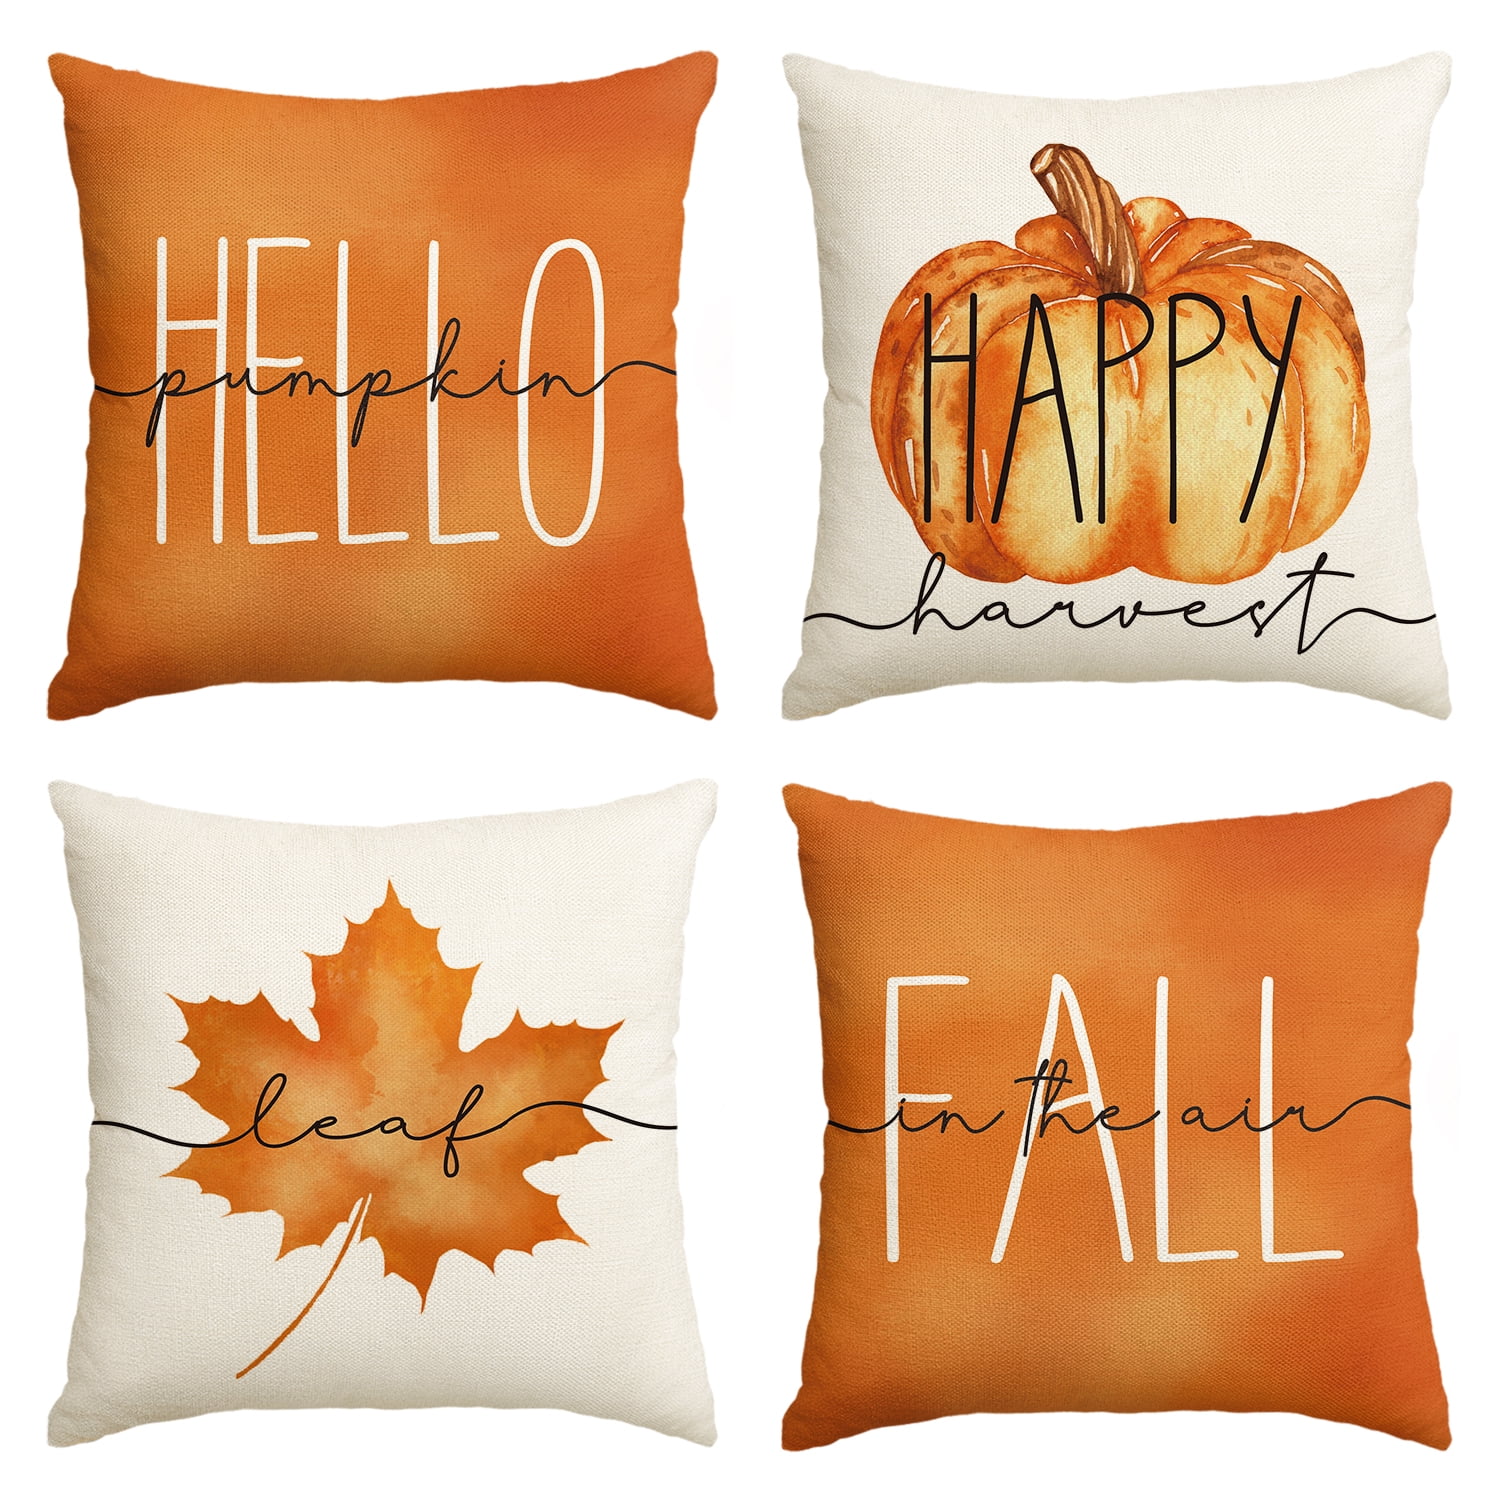 Aurora Trade Fall Pillow Covers 18x18 Set of 2 for Fall Decor Pumpkin Maple Leaves Sunflower Vase Outdoor Fall Pillows Decorative Throw Pillows